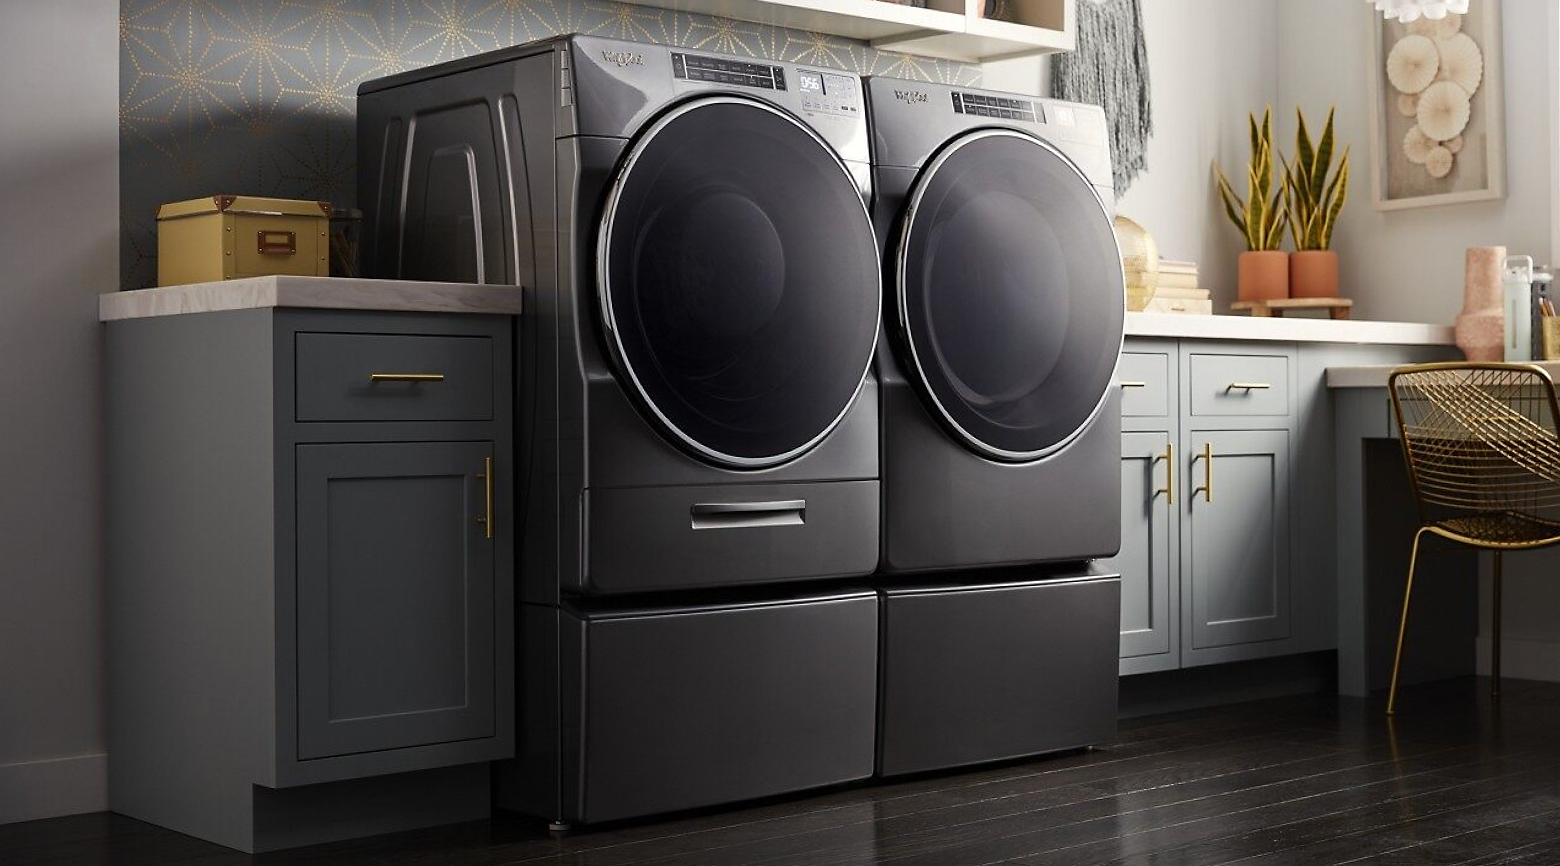 A Whirlpool® Front Load Washer and Dryer